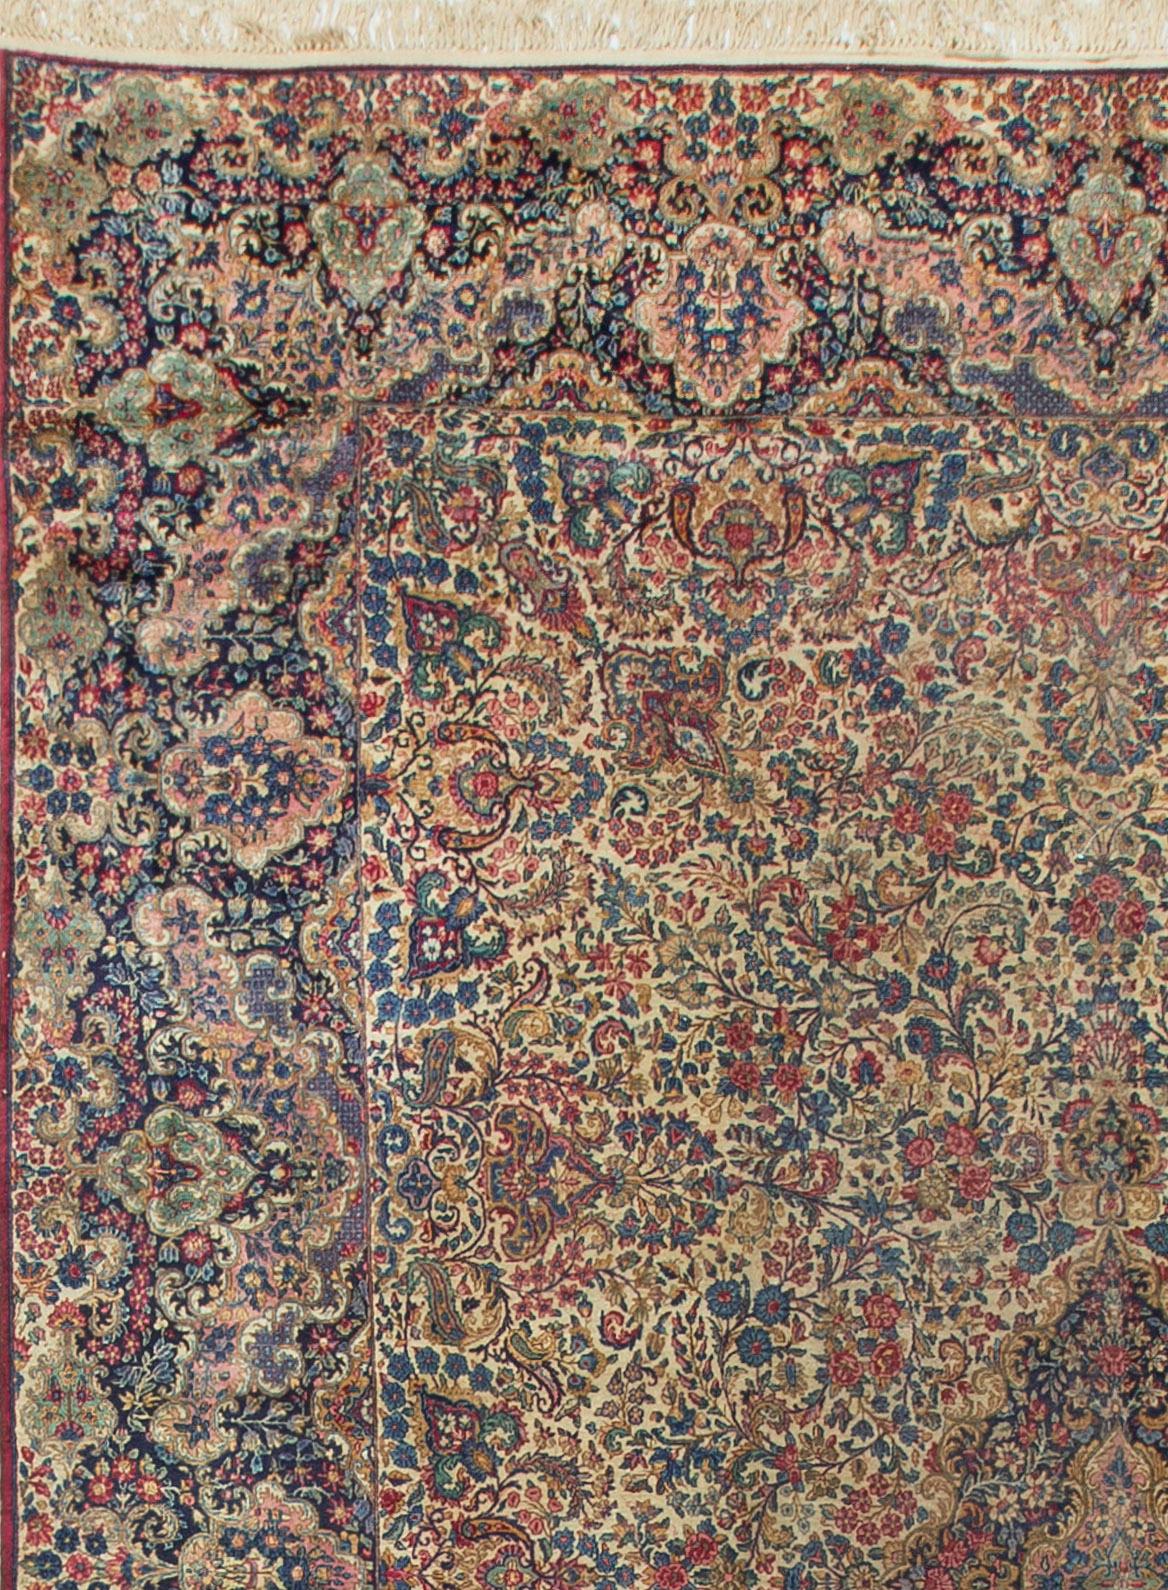 The extremely intricate design in this rug has been perfectly realized by the tremendous skills of the weavers and looking at the detail in the rug makes one appreciate a true work of art. Measures: 11'6